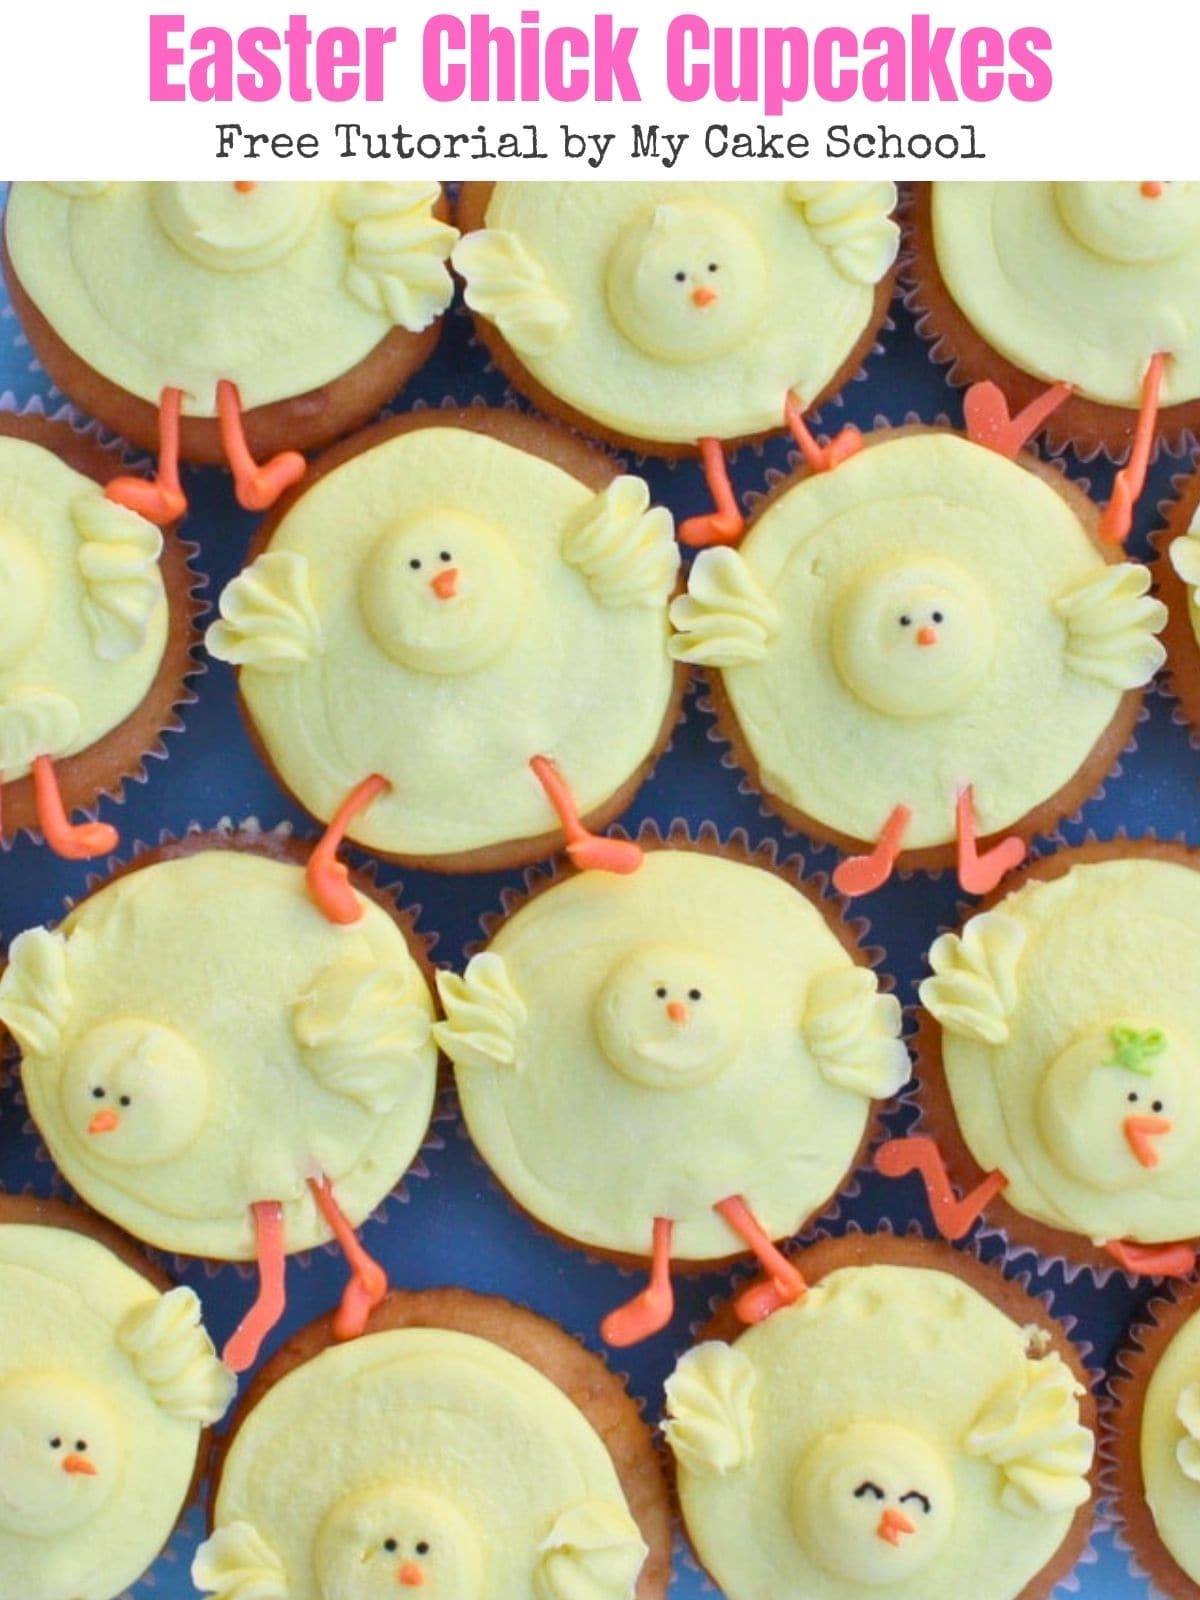 Group of Easter Chick Cupcakes 